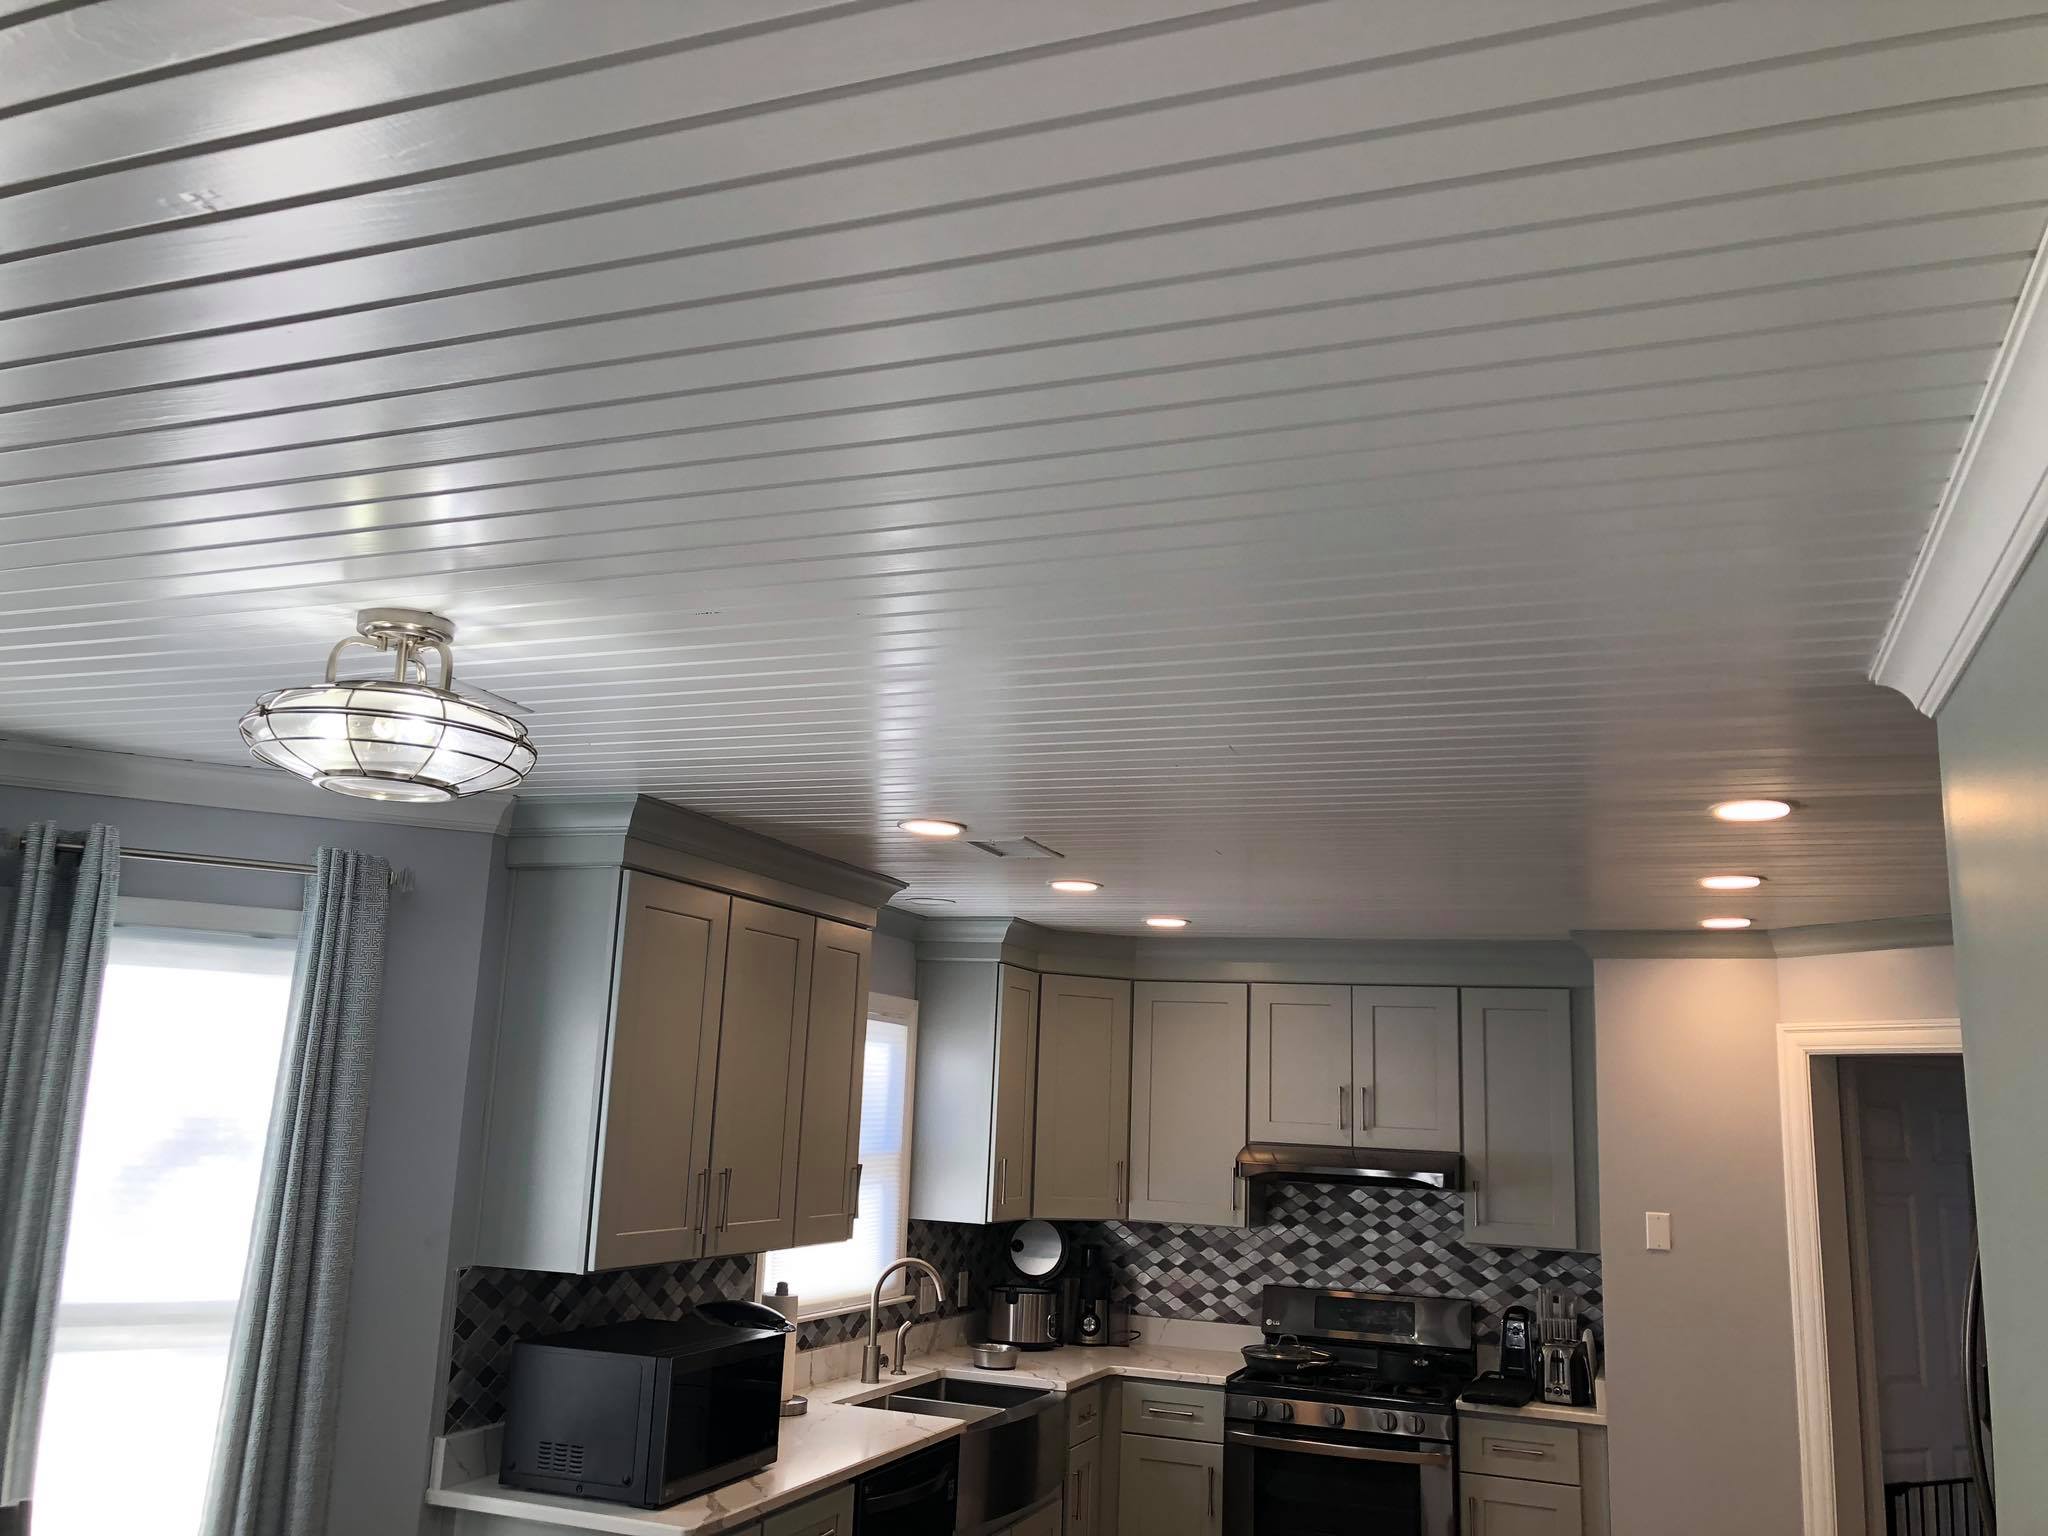 Tongue and Grove Shiplap Paneling on Ceiling Installed 2